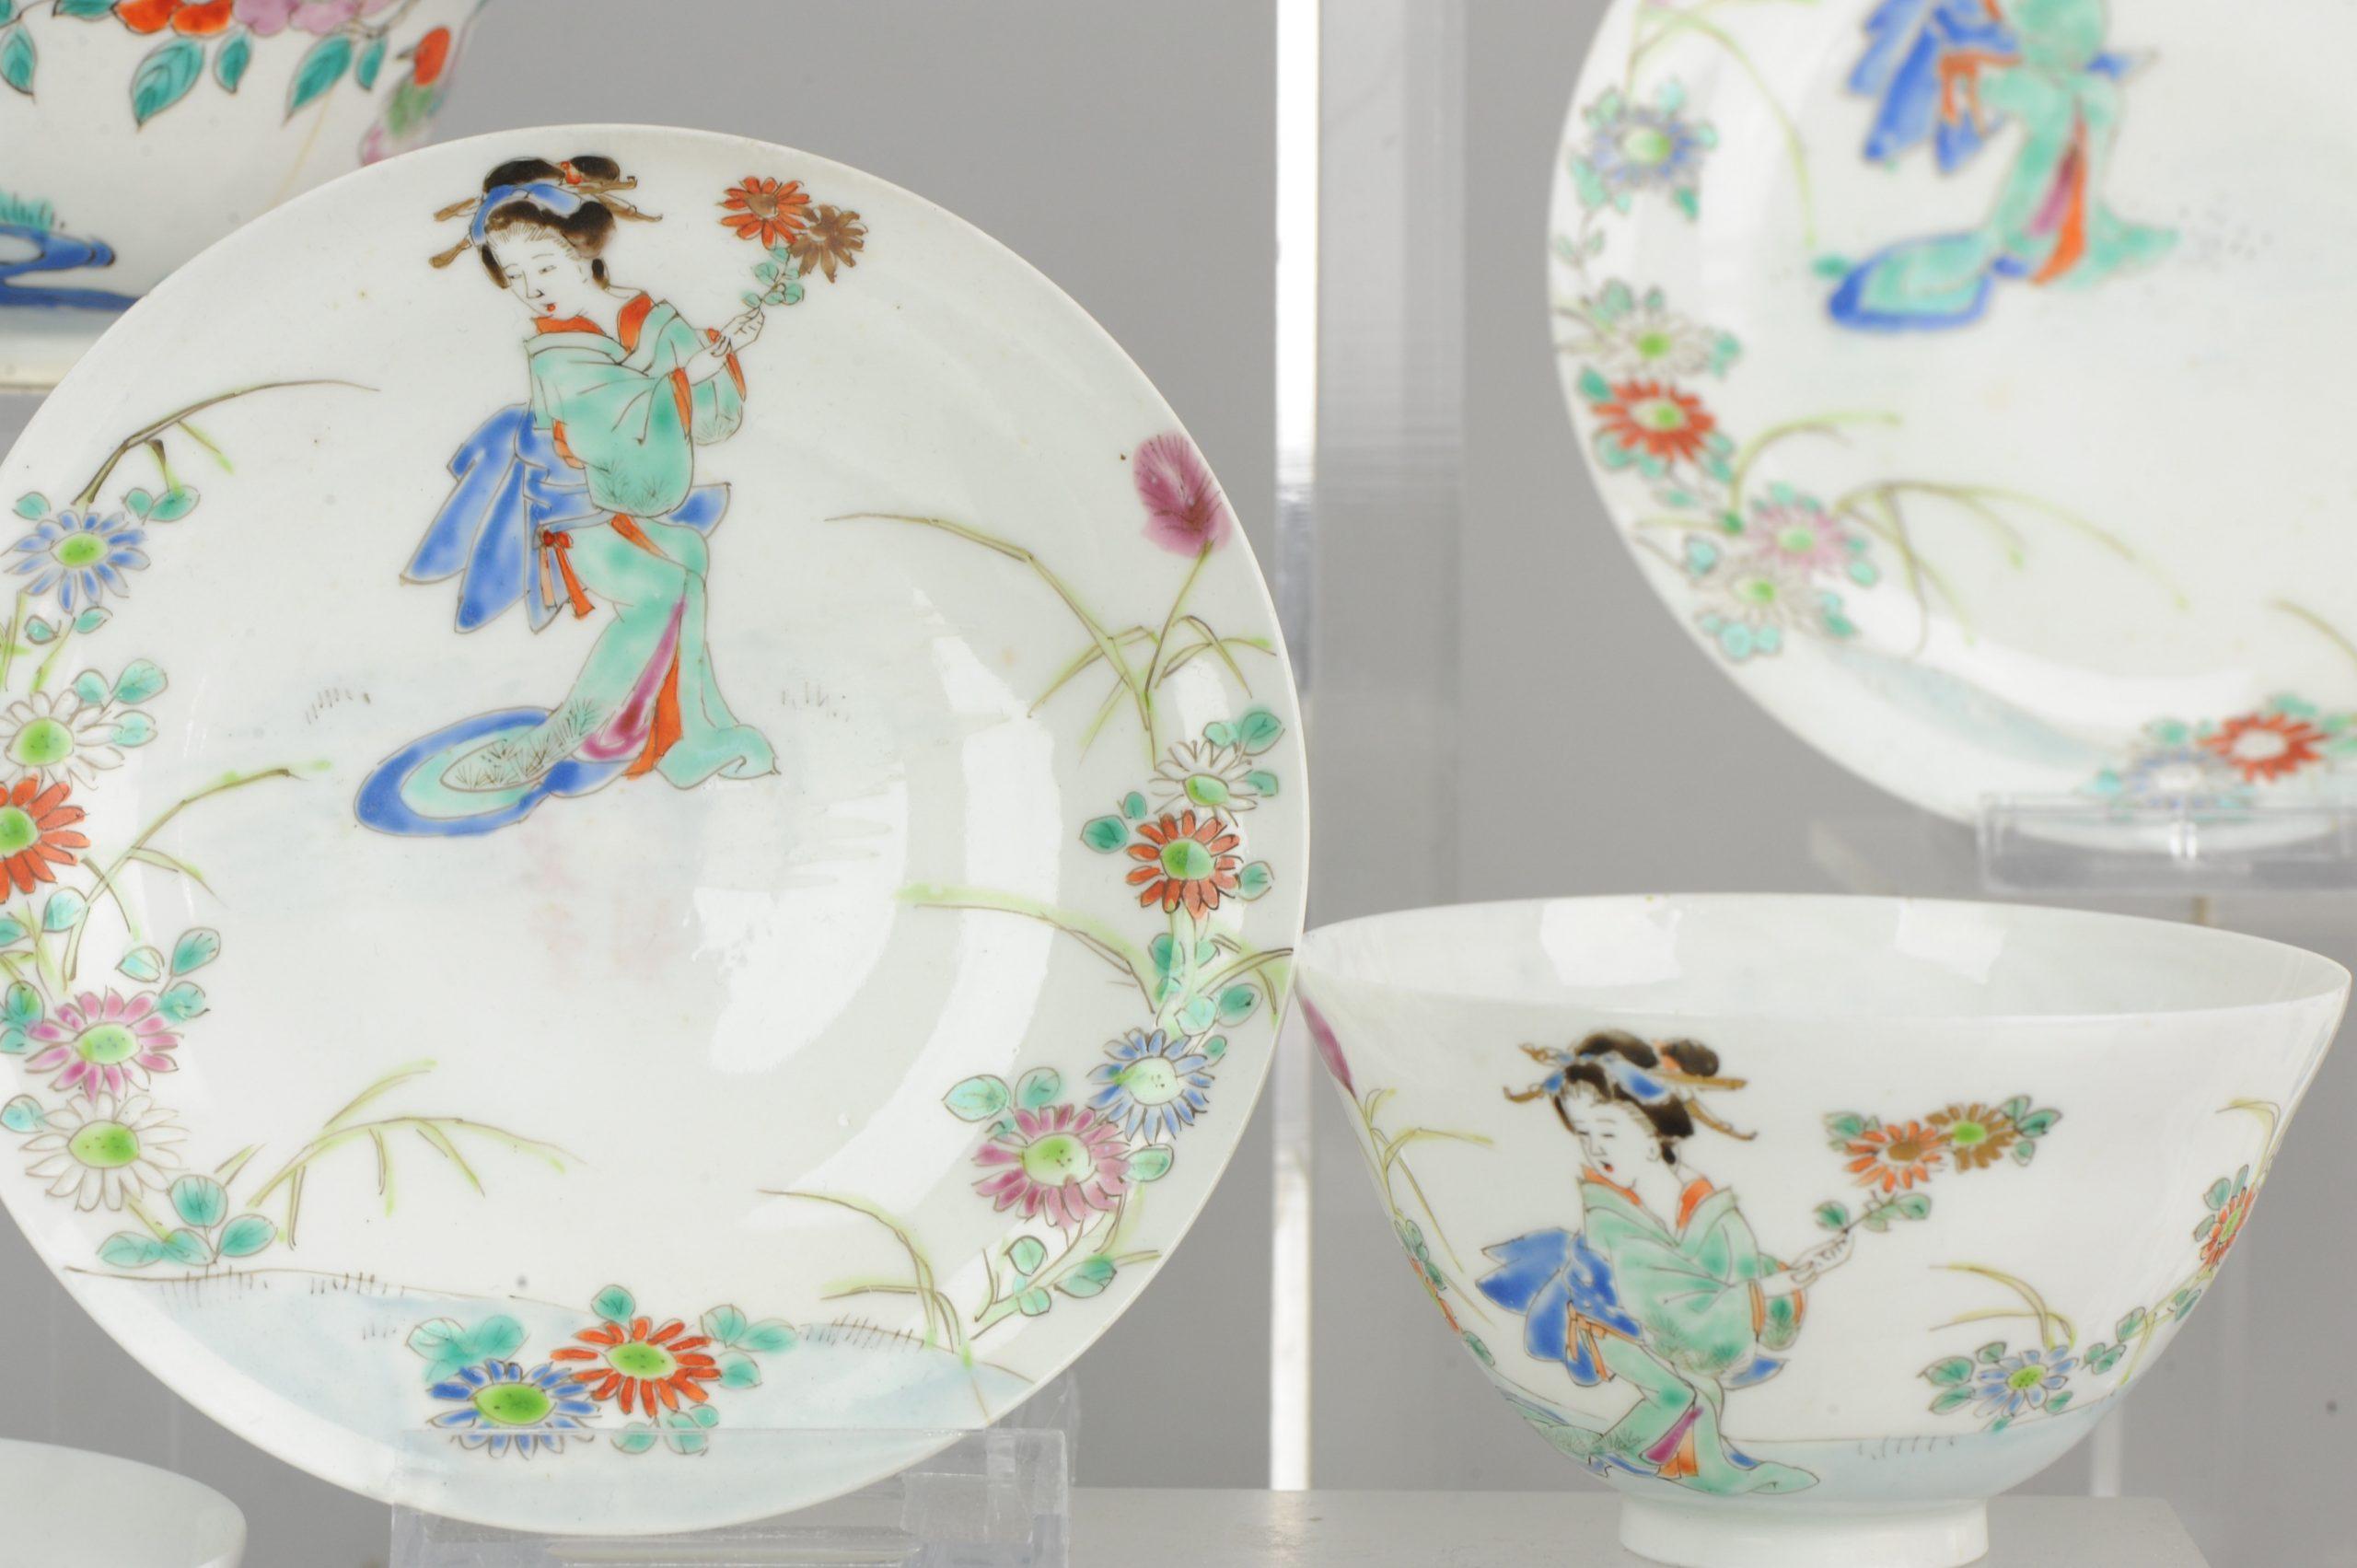 A very nice set of 4 tea bowls decorated with Women. They are marked on the base.

Additional information:
Material: Porcelain & Pottery
Type: Bowls
Region of Origin: Japan
Period: 19th century, 20th century
Age: Pre-1800
Condition: Overall